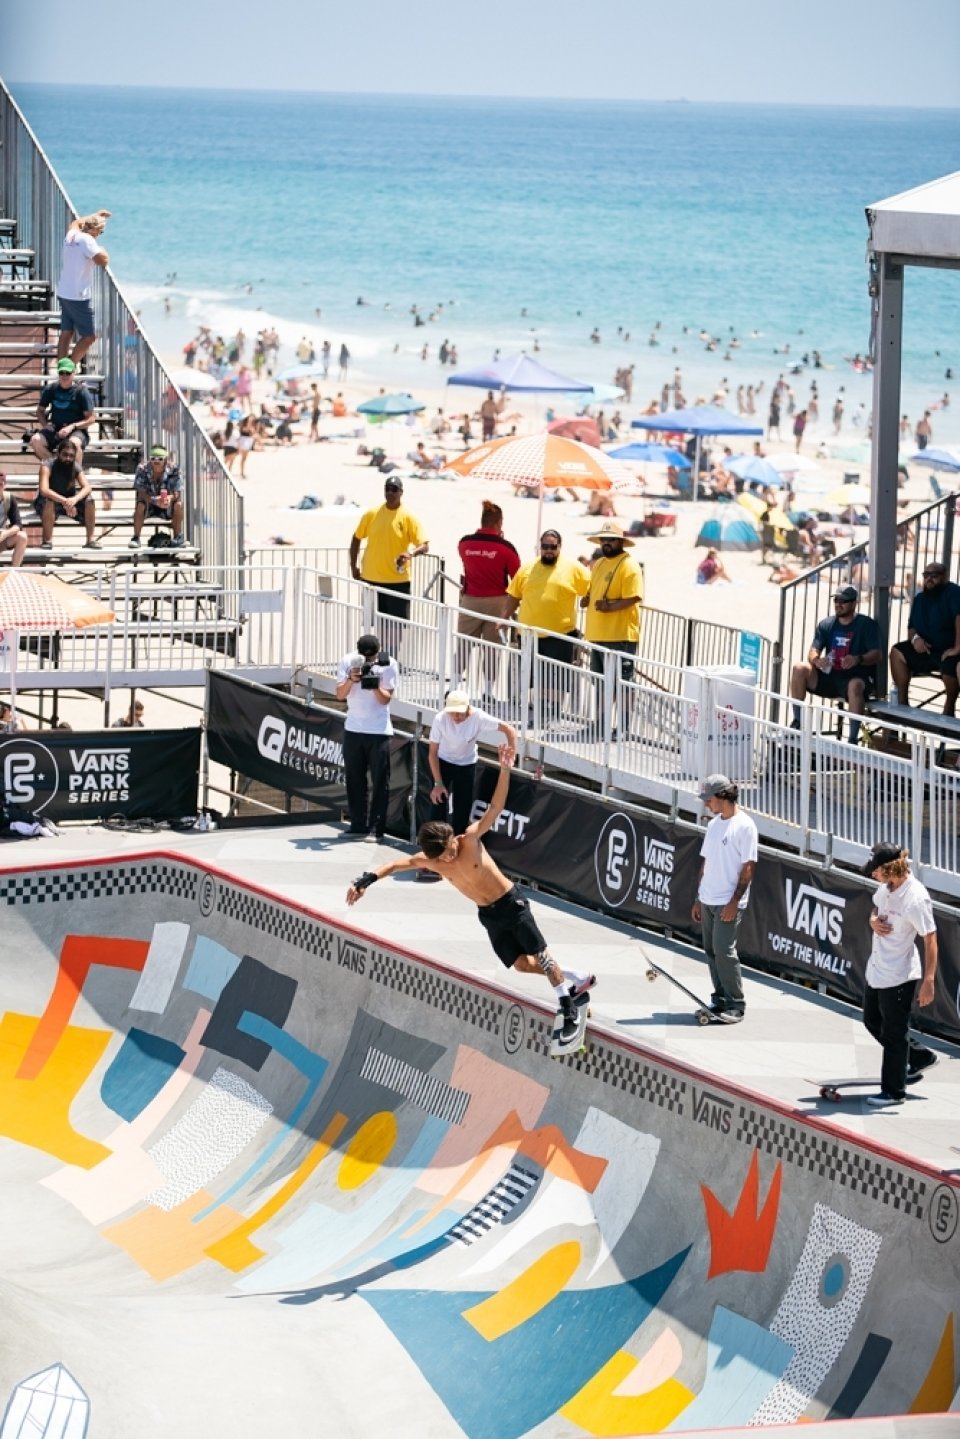 Heimana Reynolds from Hawaii qualified with the 2nd highest run score in the Men's Pro Tour Prelims  Photo: Anthony Acosta</span>